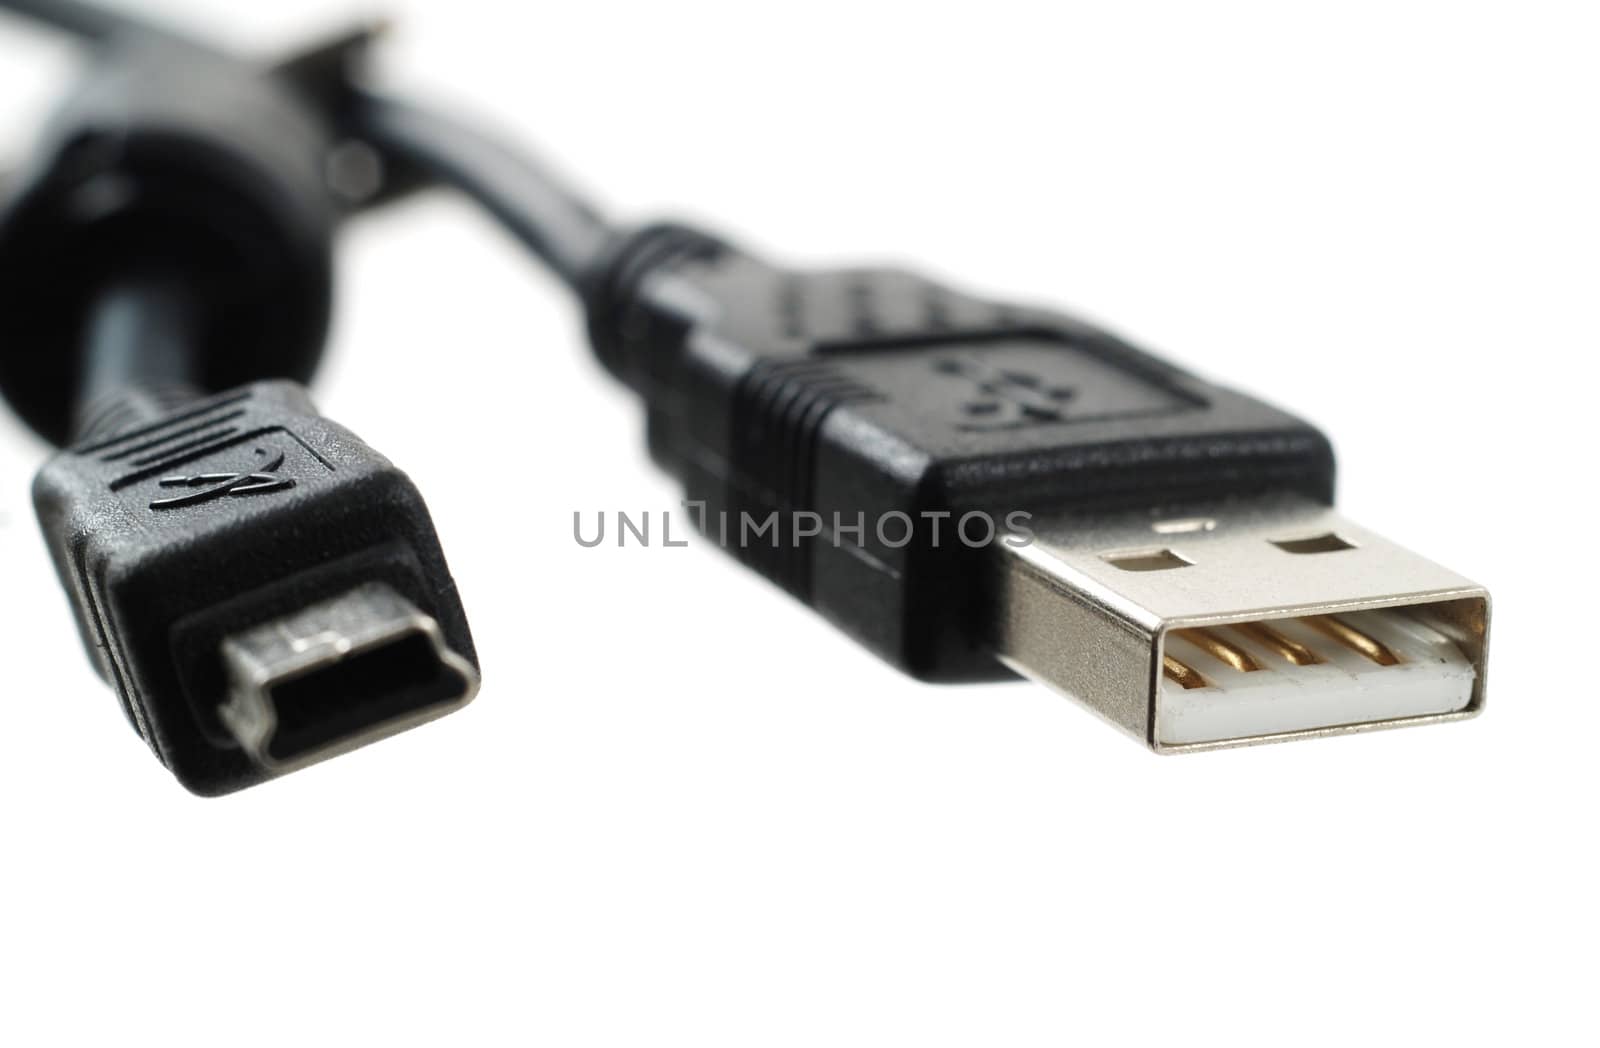 stock pictures of an USB cable and connector